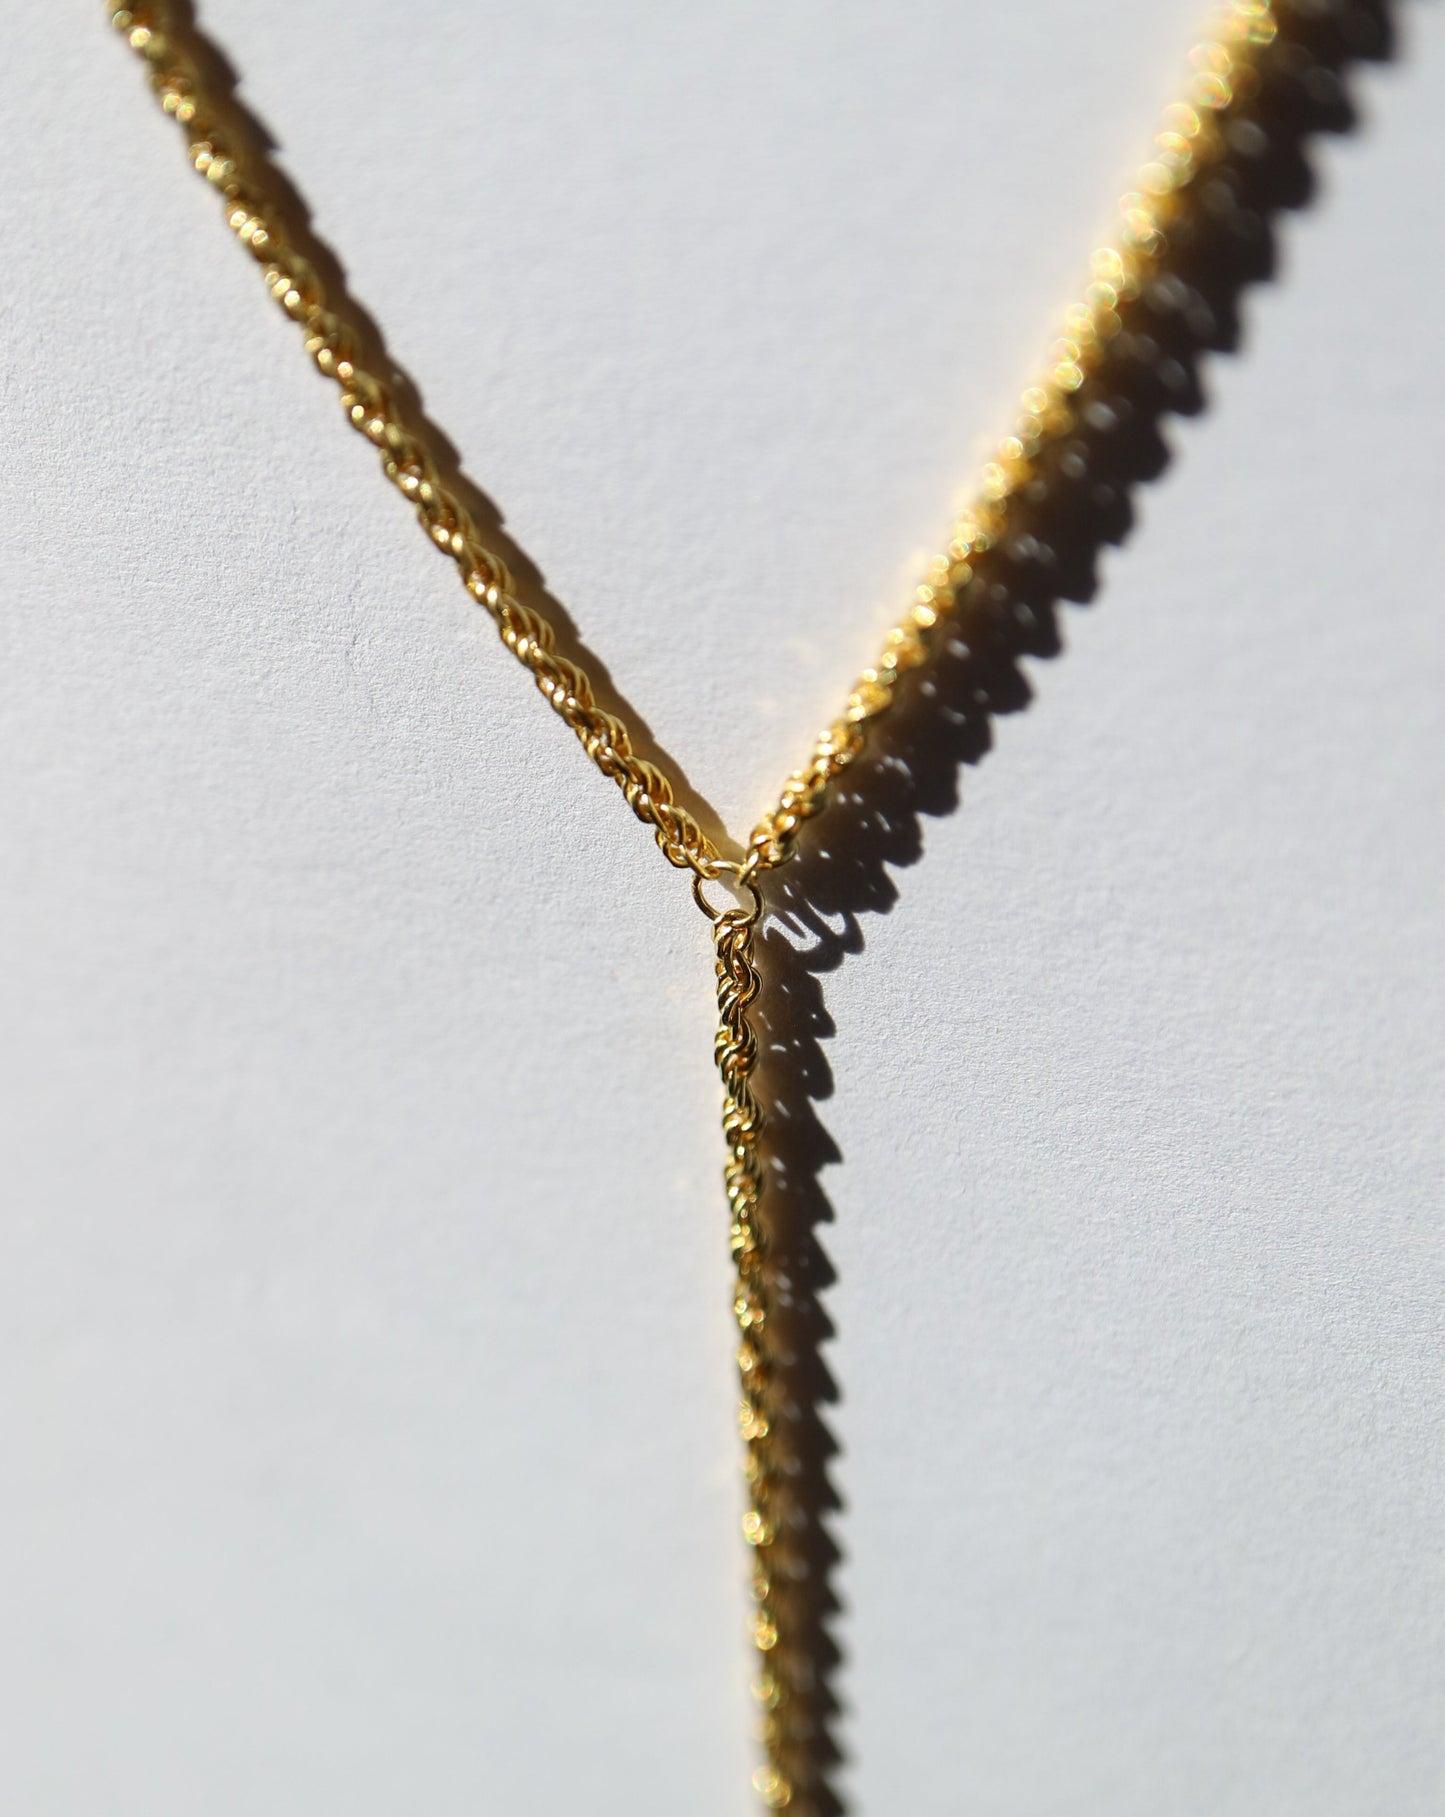 Gold Rope Lariat Necklace